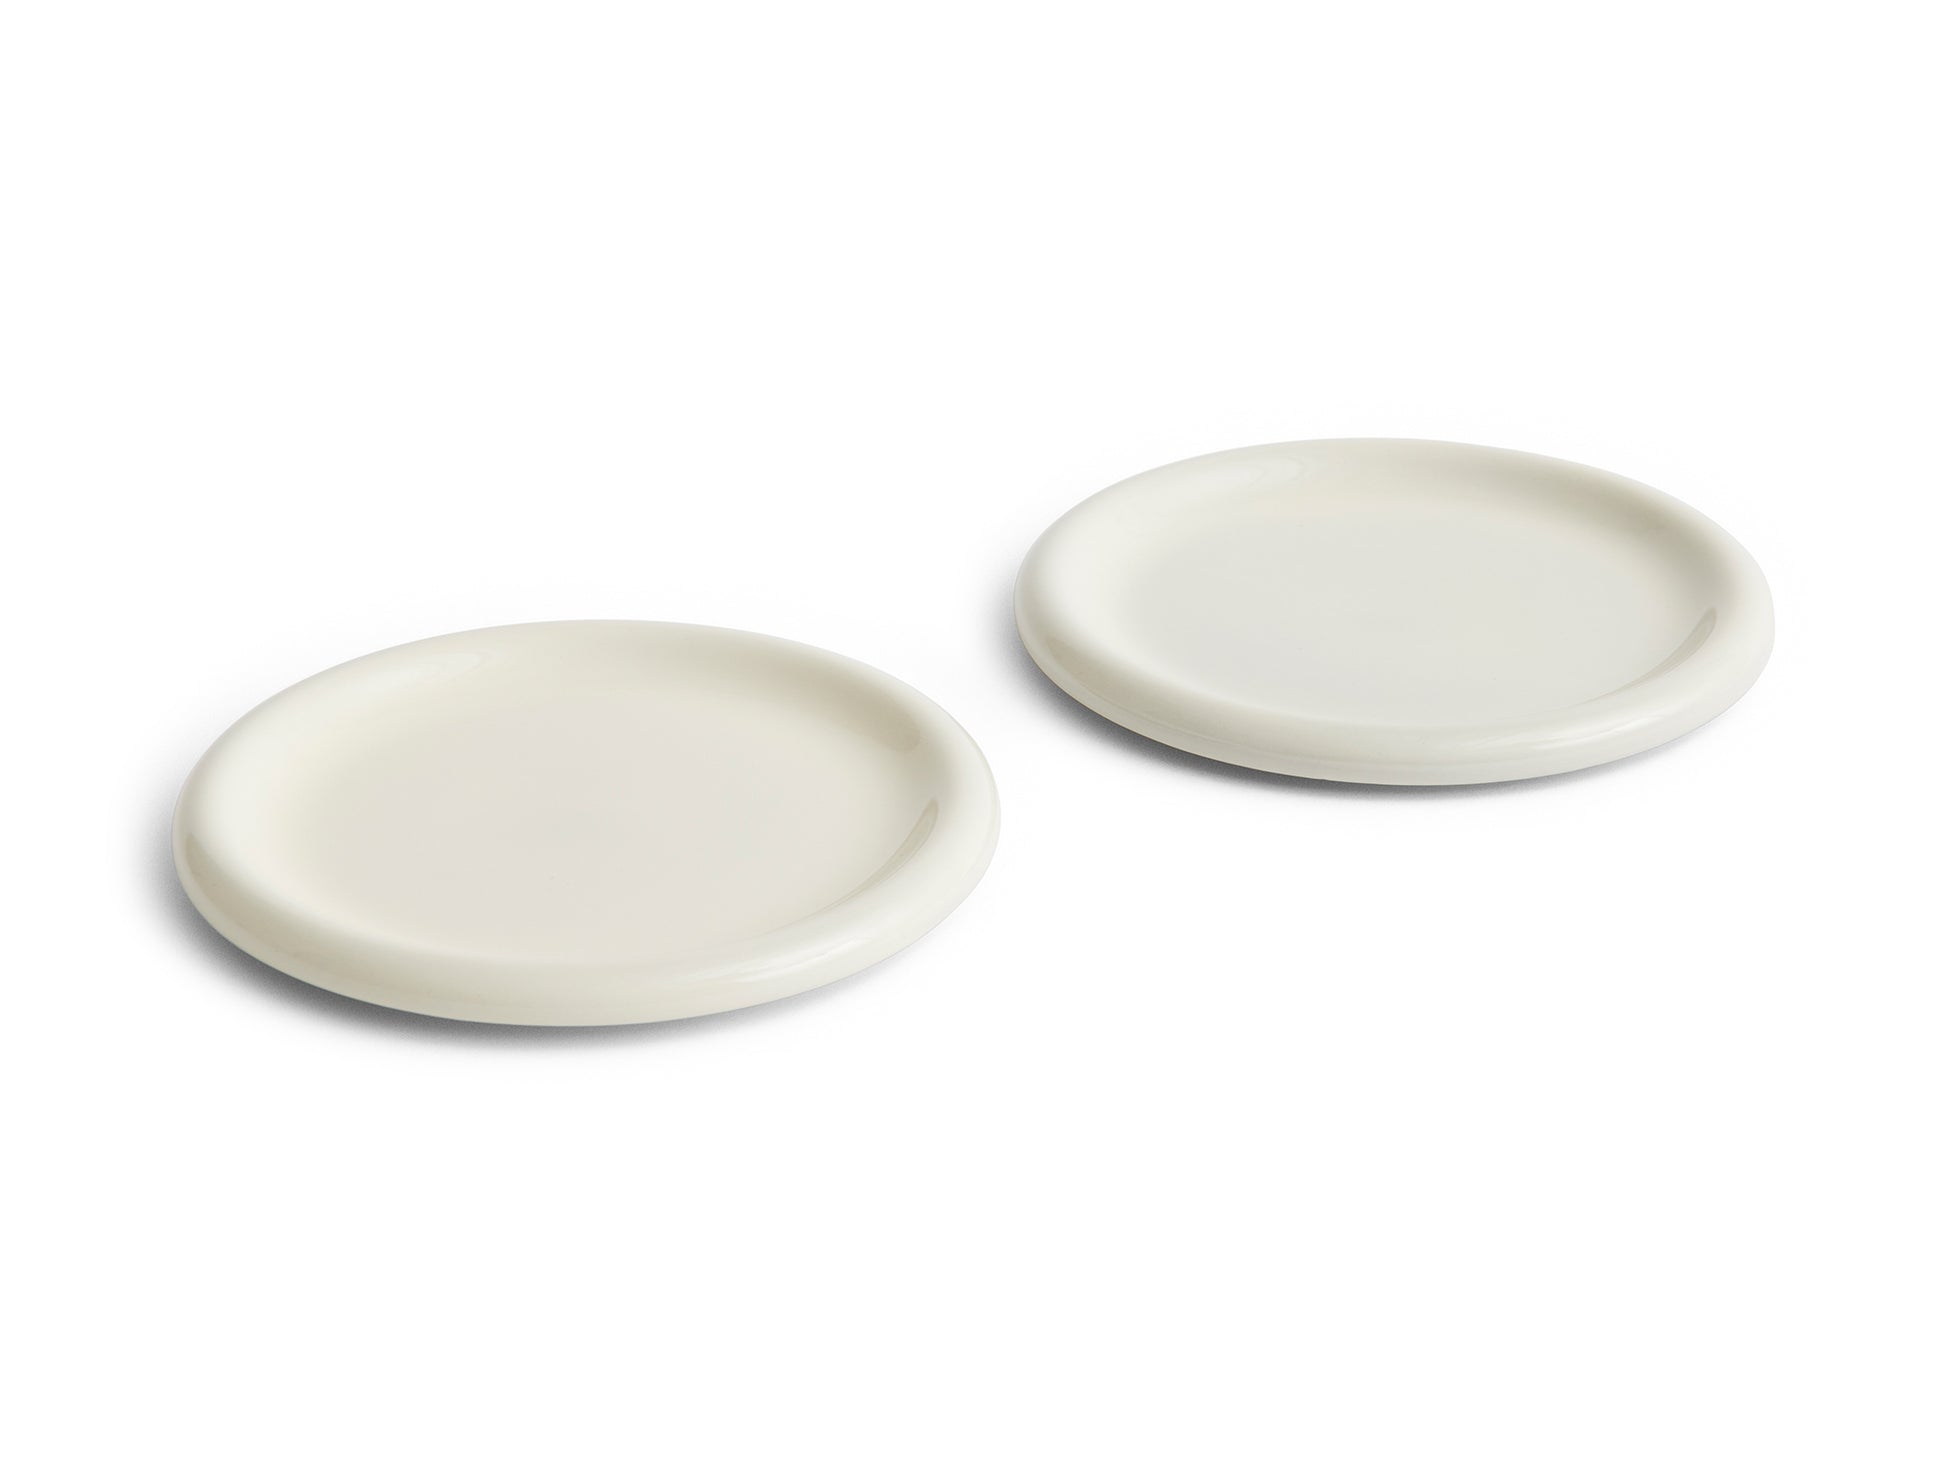 Barro Plate - Set of 2 by HAY - D 24 cm / Off White